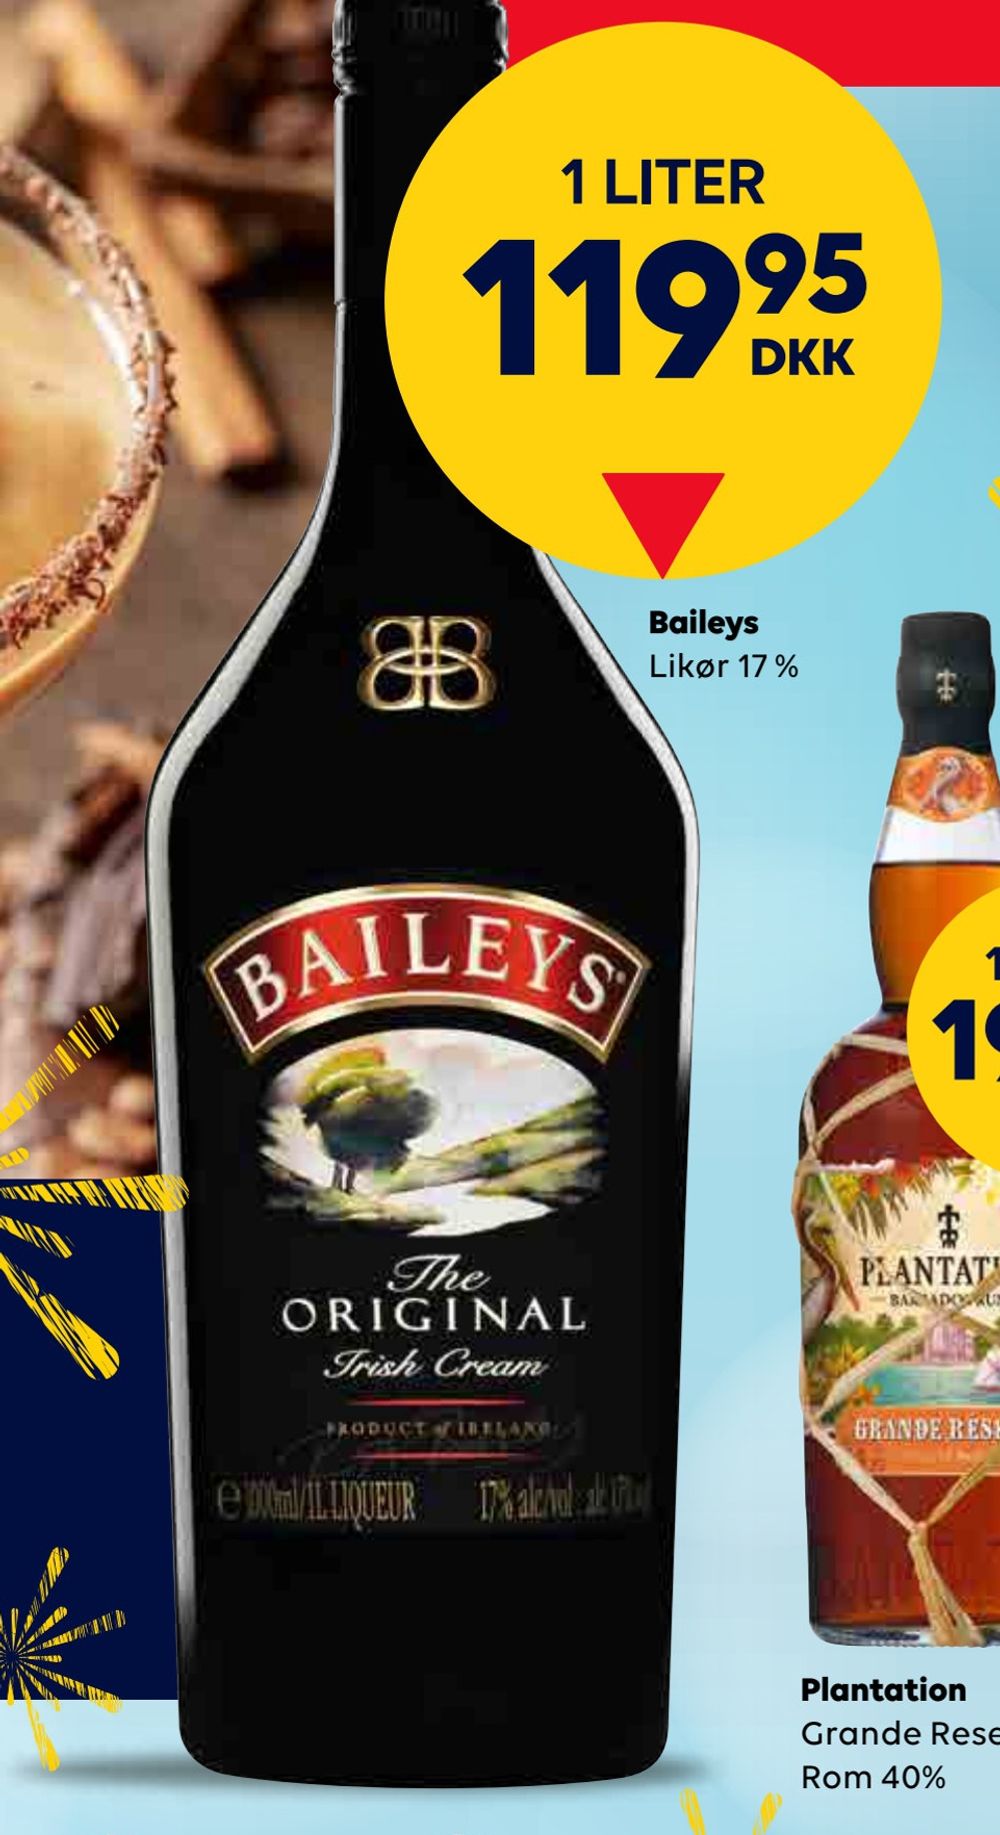 Deals on Baileys from BorderShop at 119,95 kr.